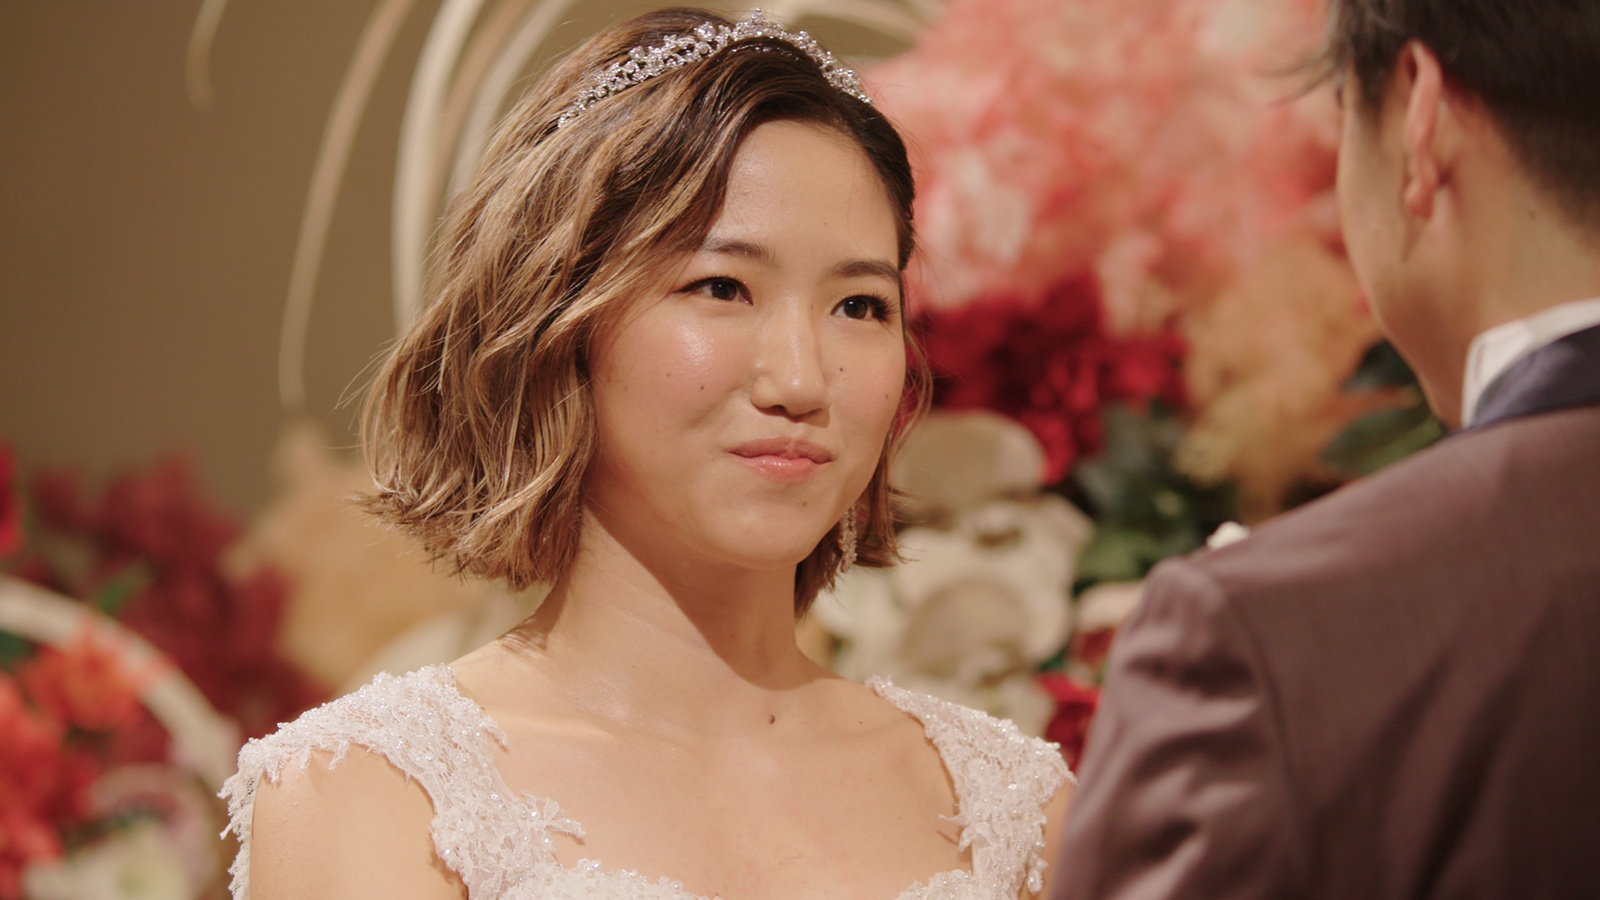 Mori Love Is Blind Japan Love Is Blind Japan: Which Couples Got Married? - TV Guide